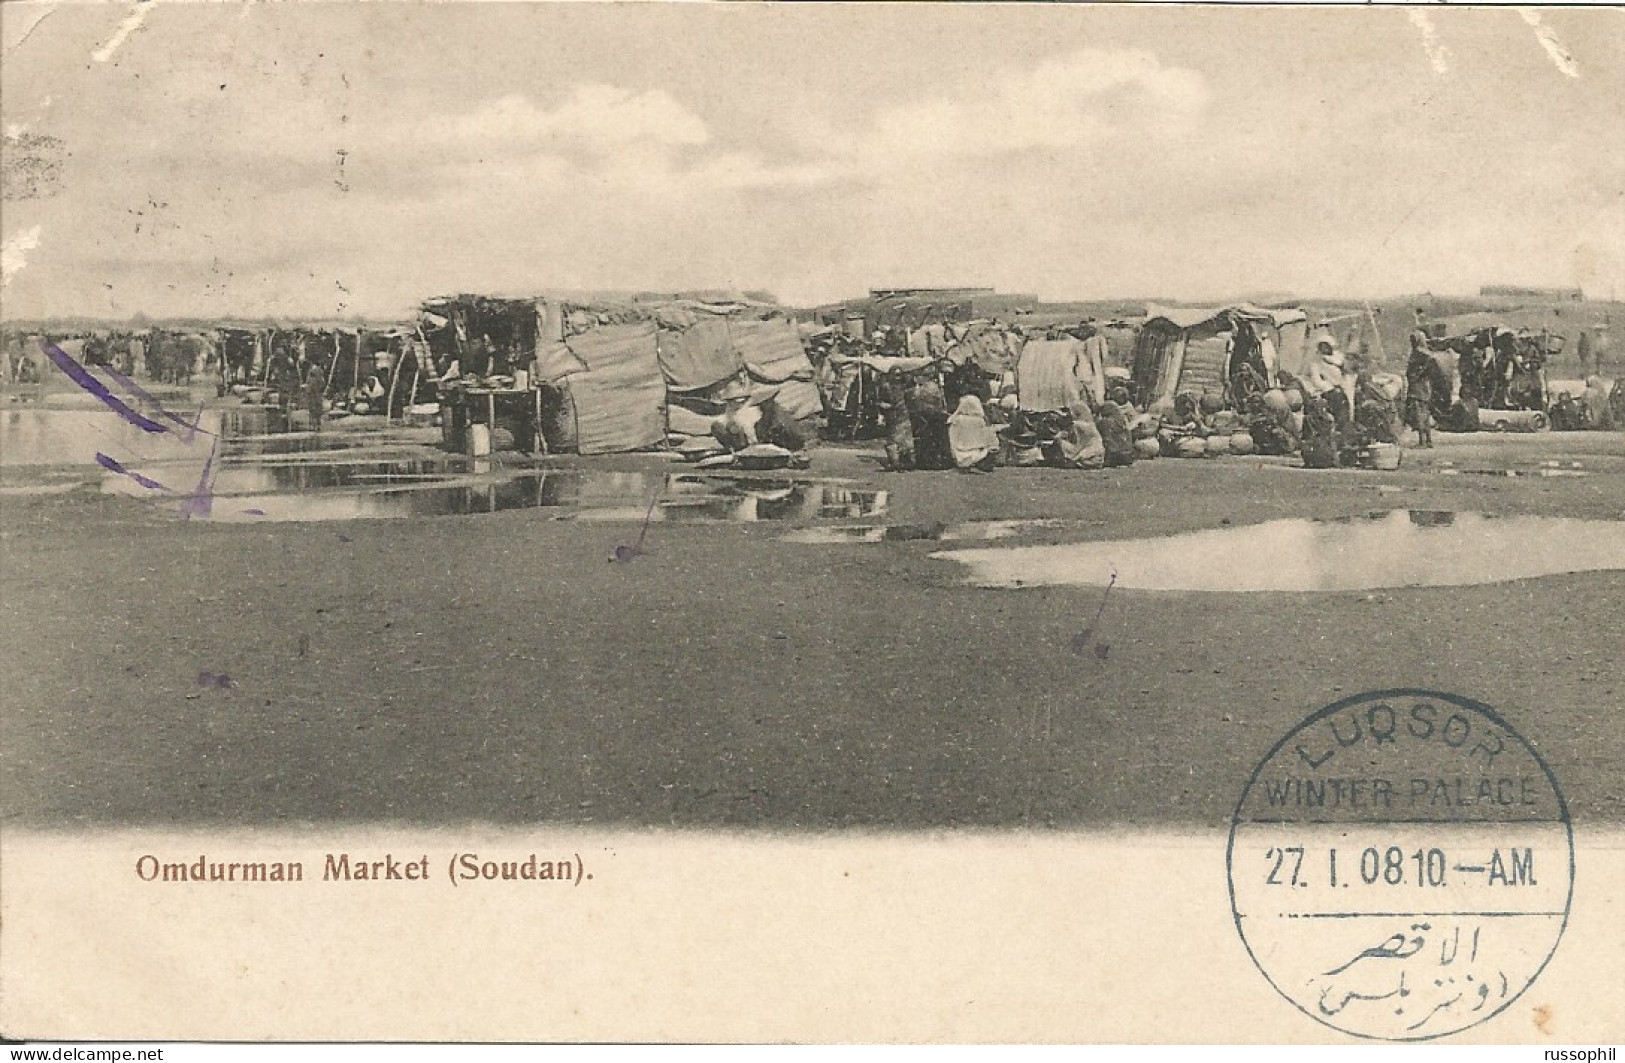 SUDAN - 1 MIL. FRANKING ON PC (VIEW OF OMDURMAN MARKET) TO THE POSTMASTER AT THE WINTER PALACE IN LUQSOR - 1908 - Soudan (...-1951)